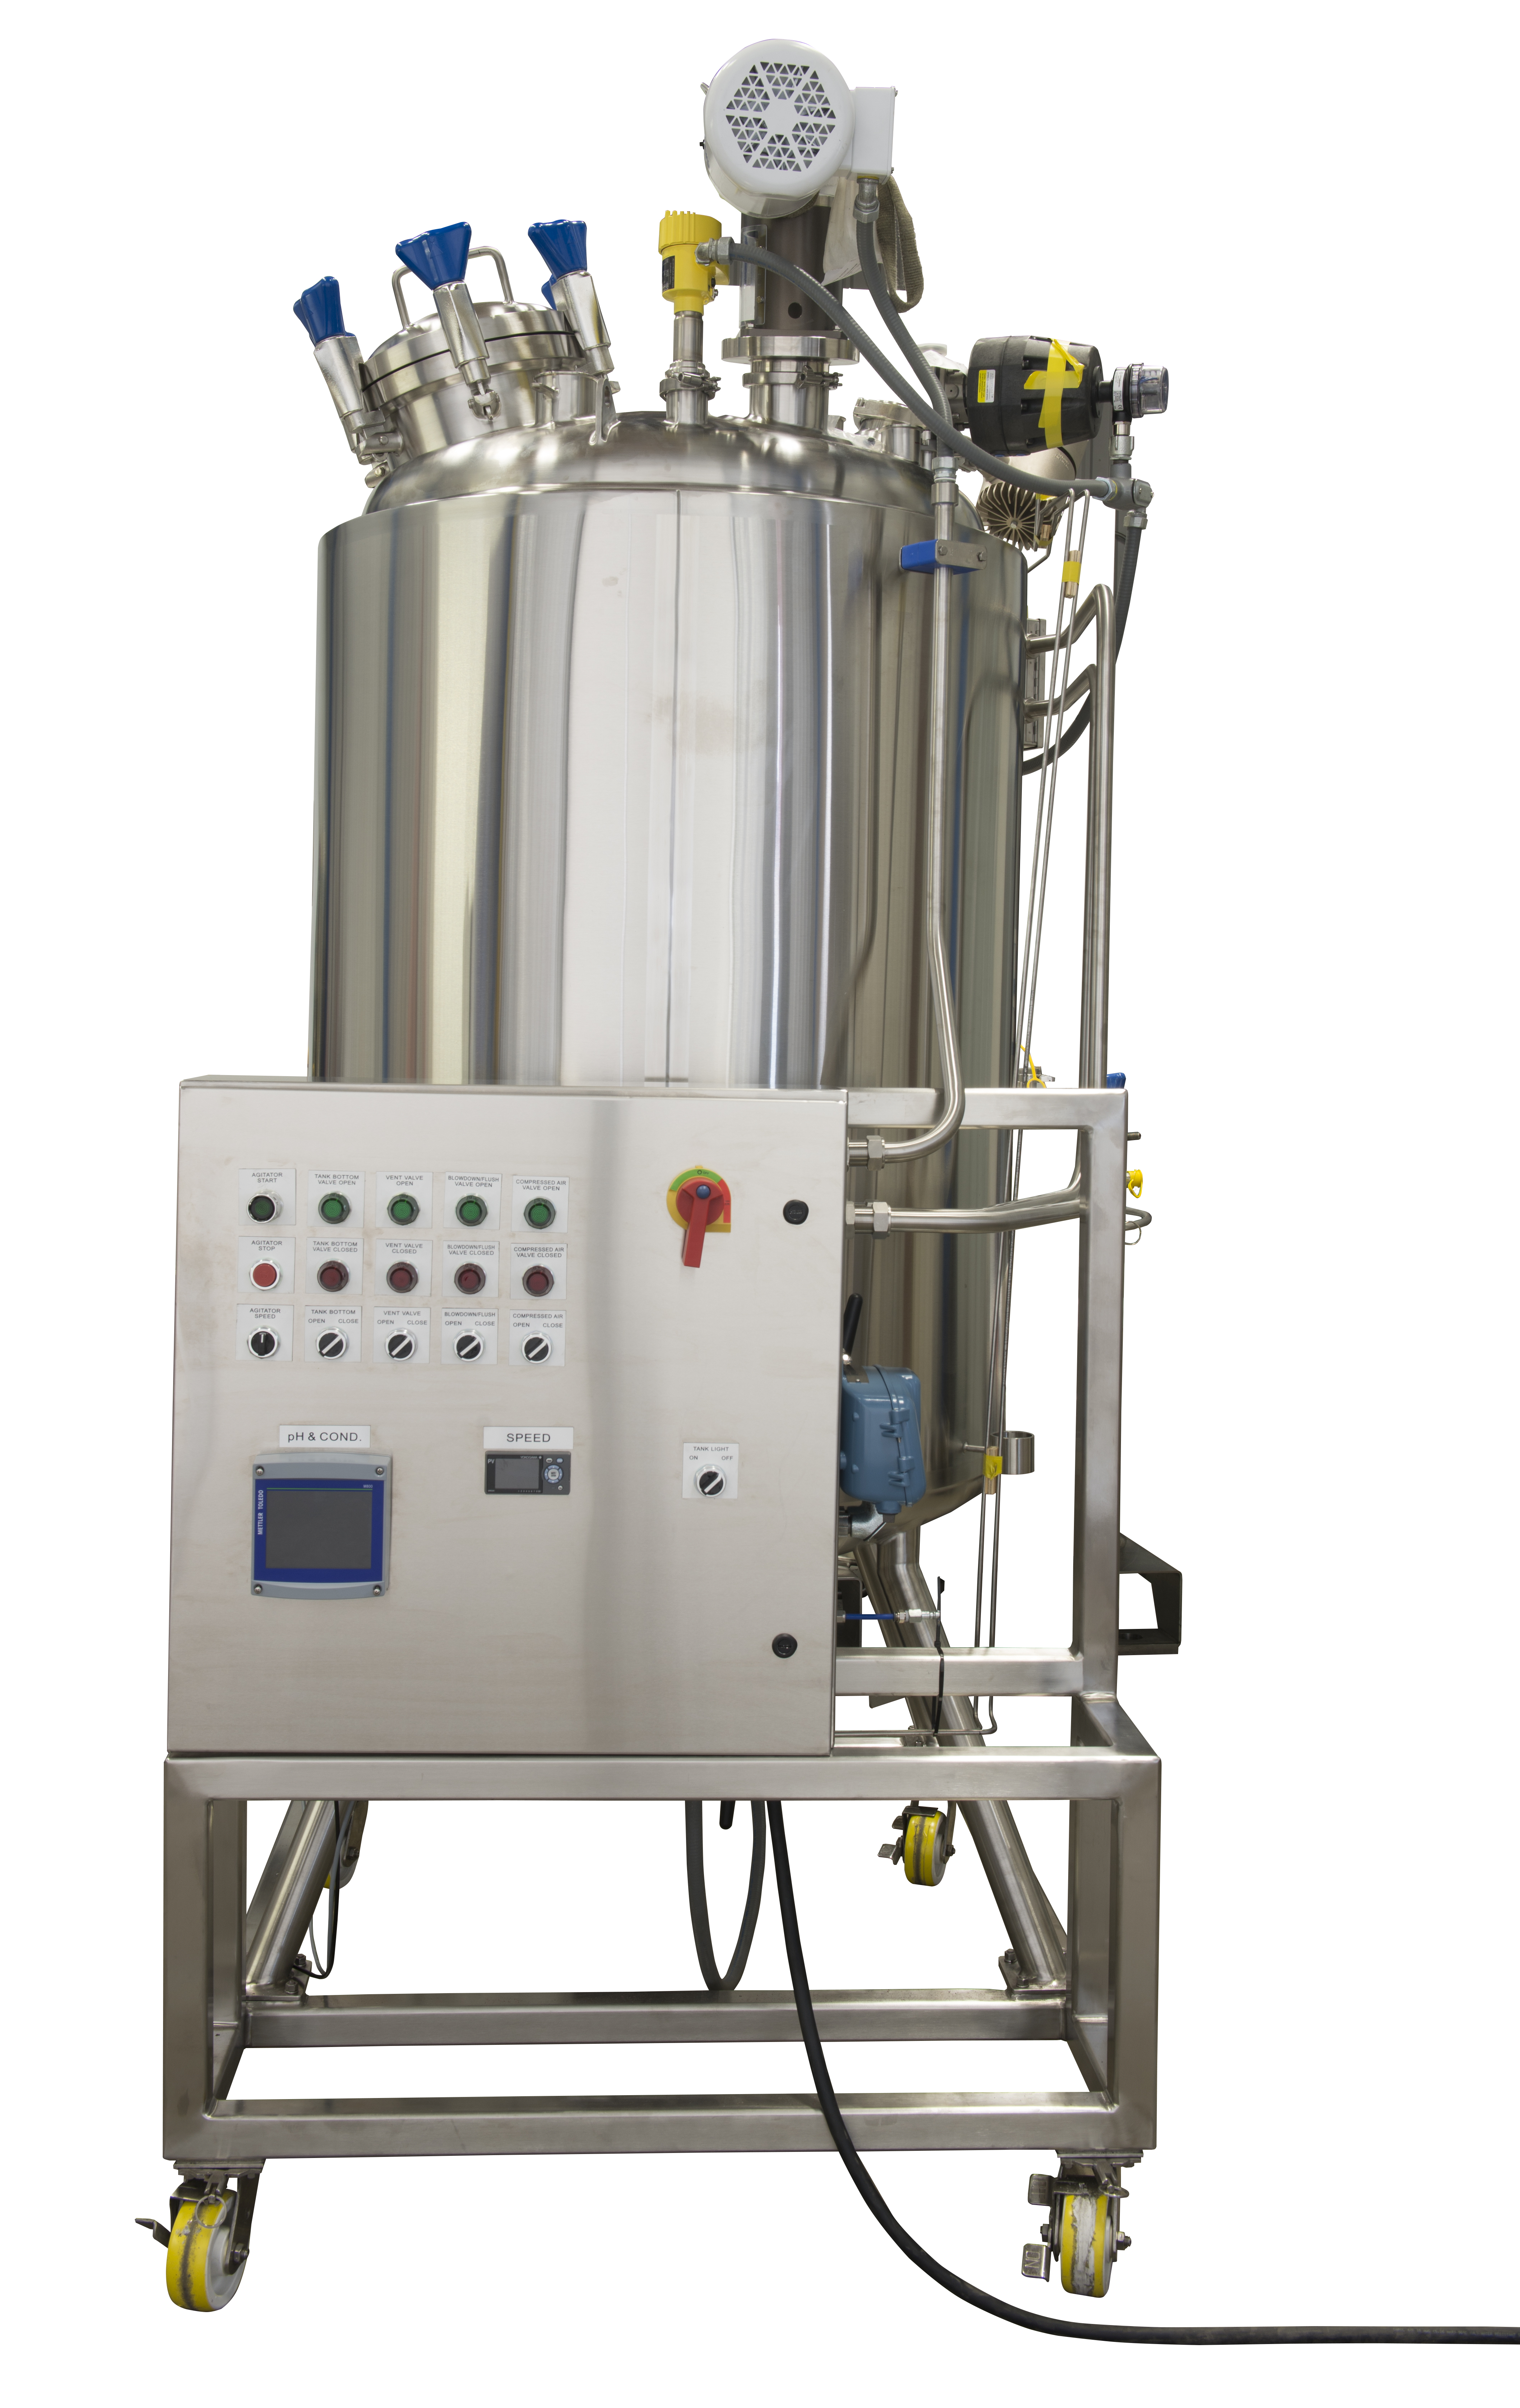 For a smarter mixing tank, this mixing vessel features a control panel.